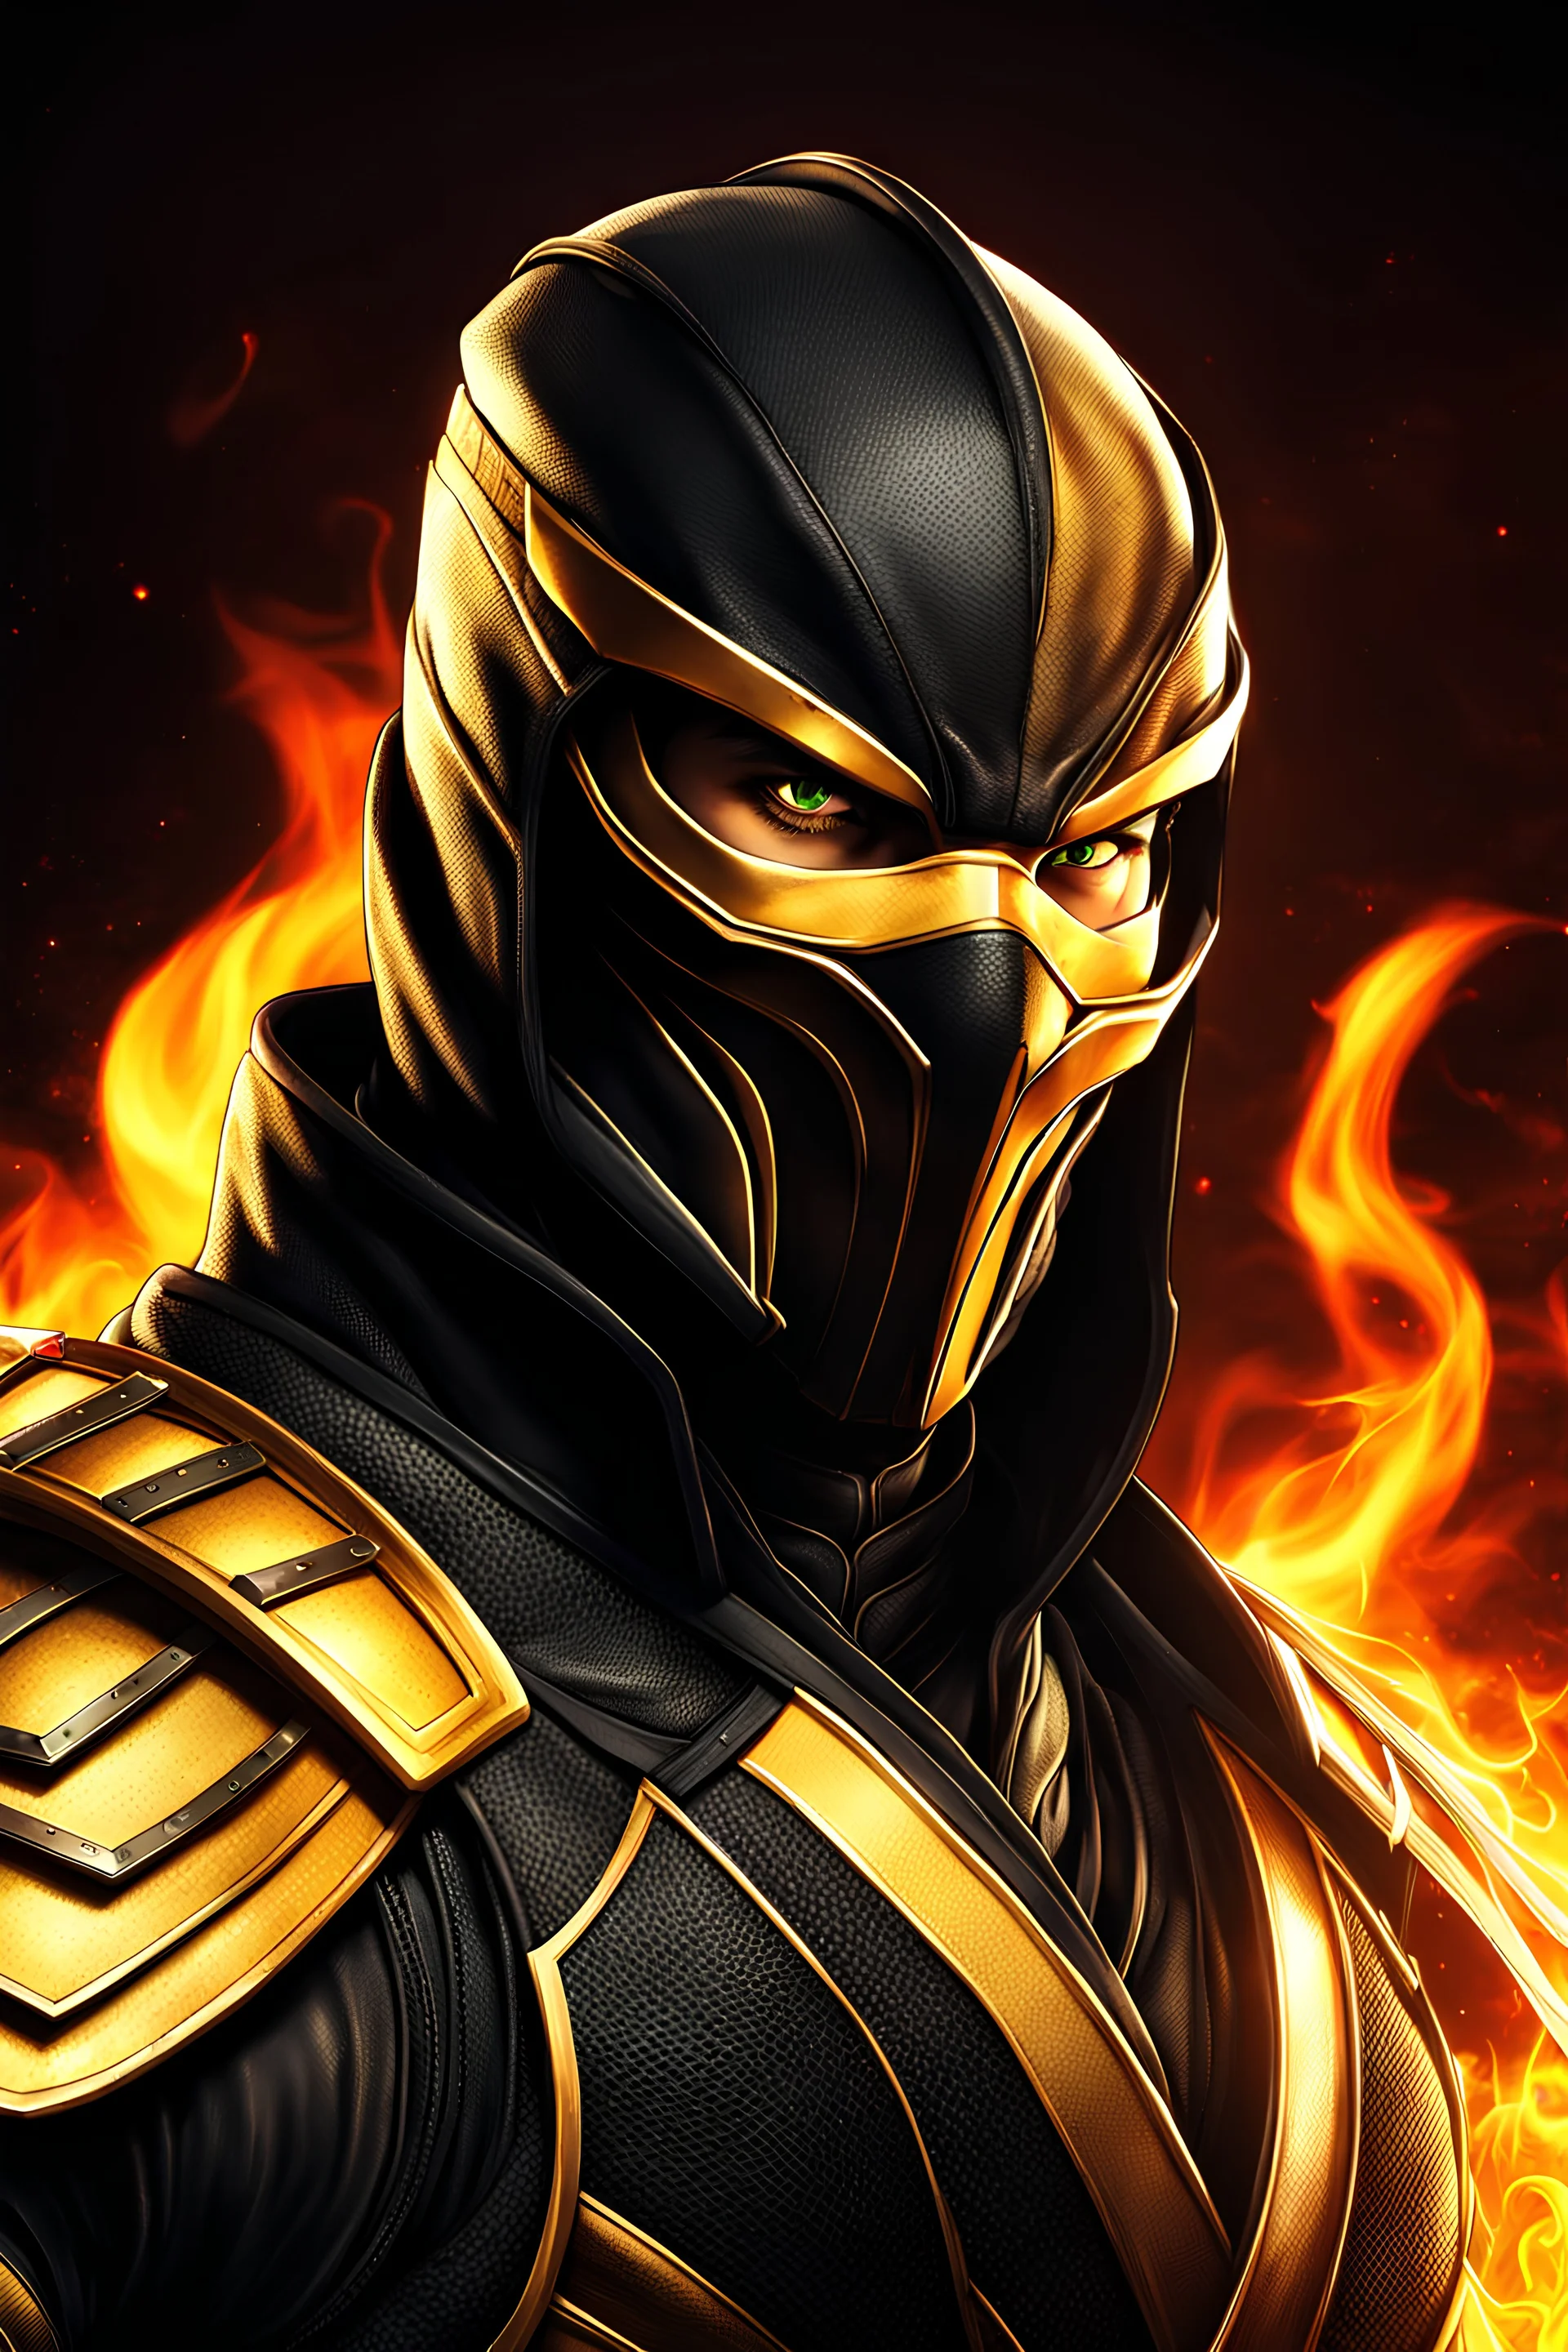 portrait of Scorpion from Mortal Kombat, 4k resolution, anime line art, with clear lines, no shadows, on a fire background suitable for Scorpion, fully colored with stunning colors